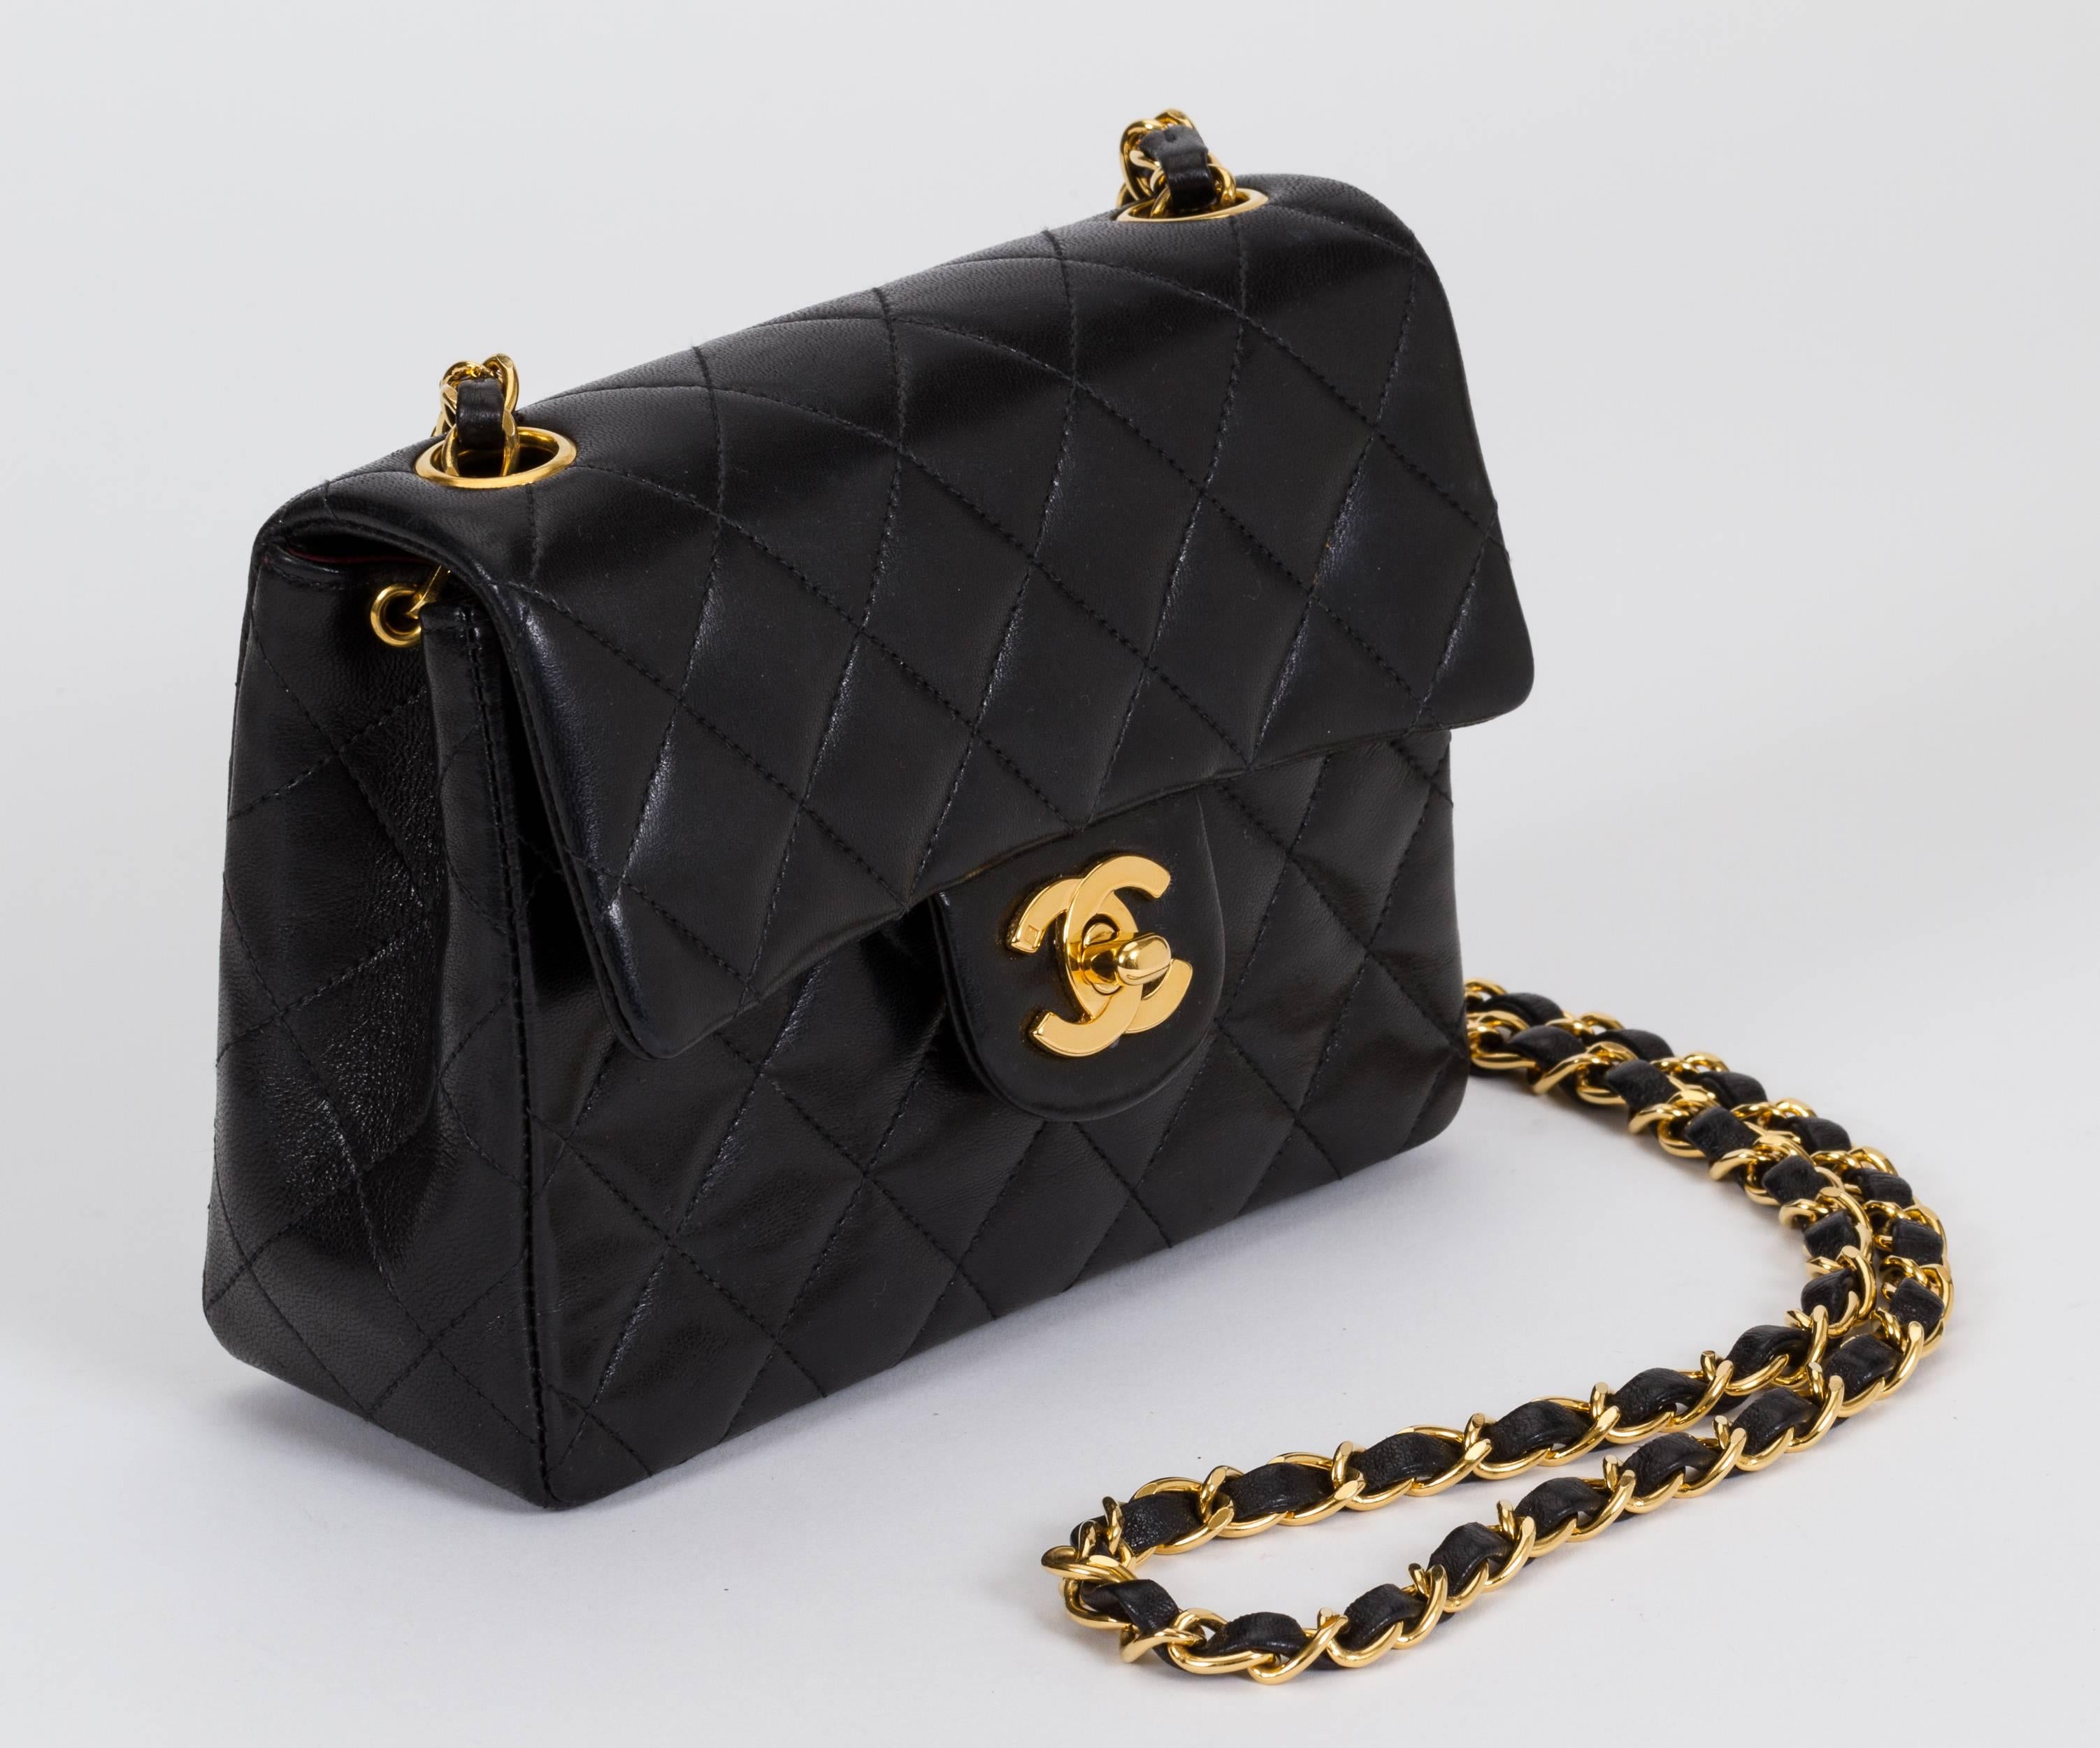 Chanel classic small single flap purse in black lambskin with gold tone hardware. Can be worn cross body.  Shoulder drop, 22